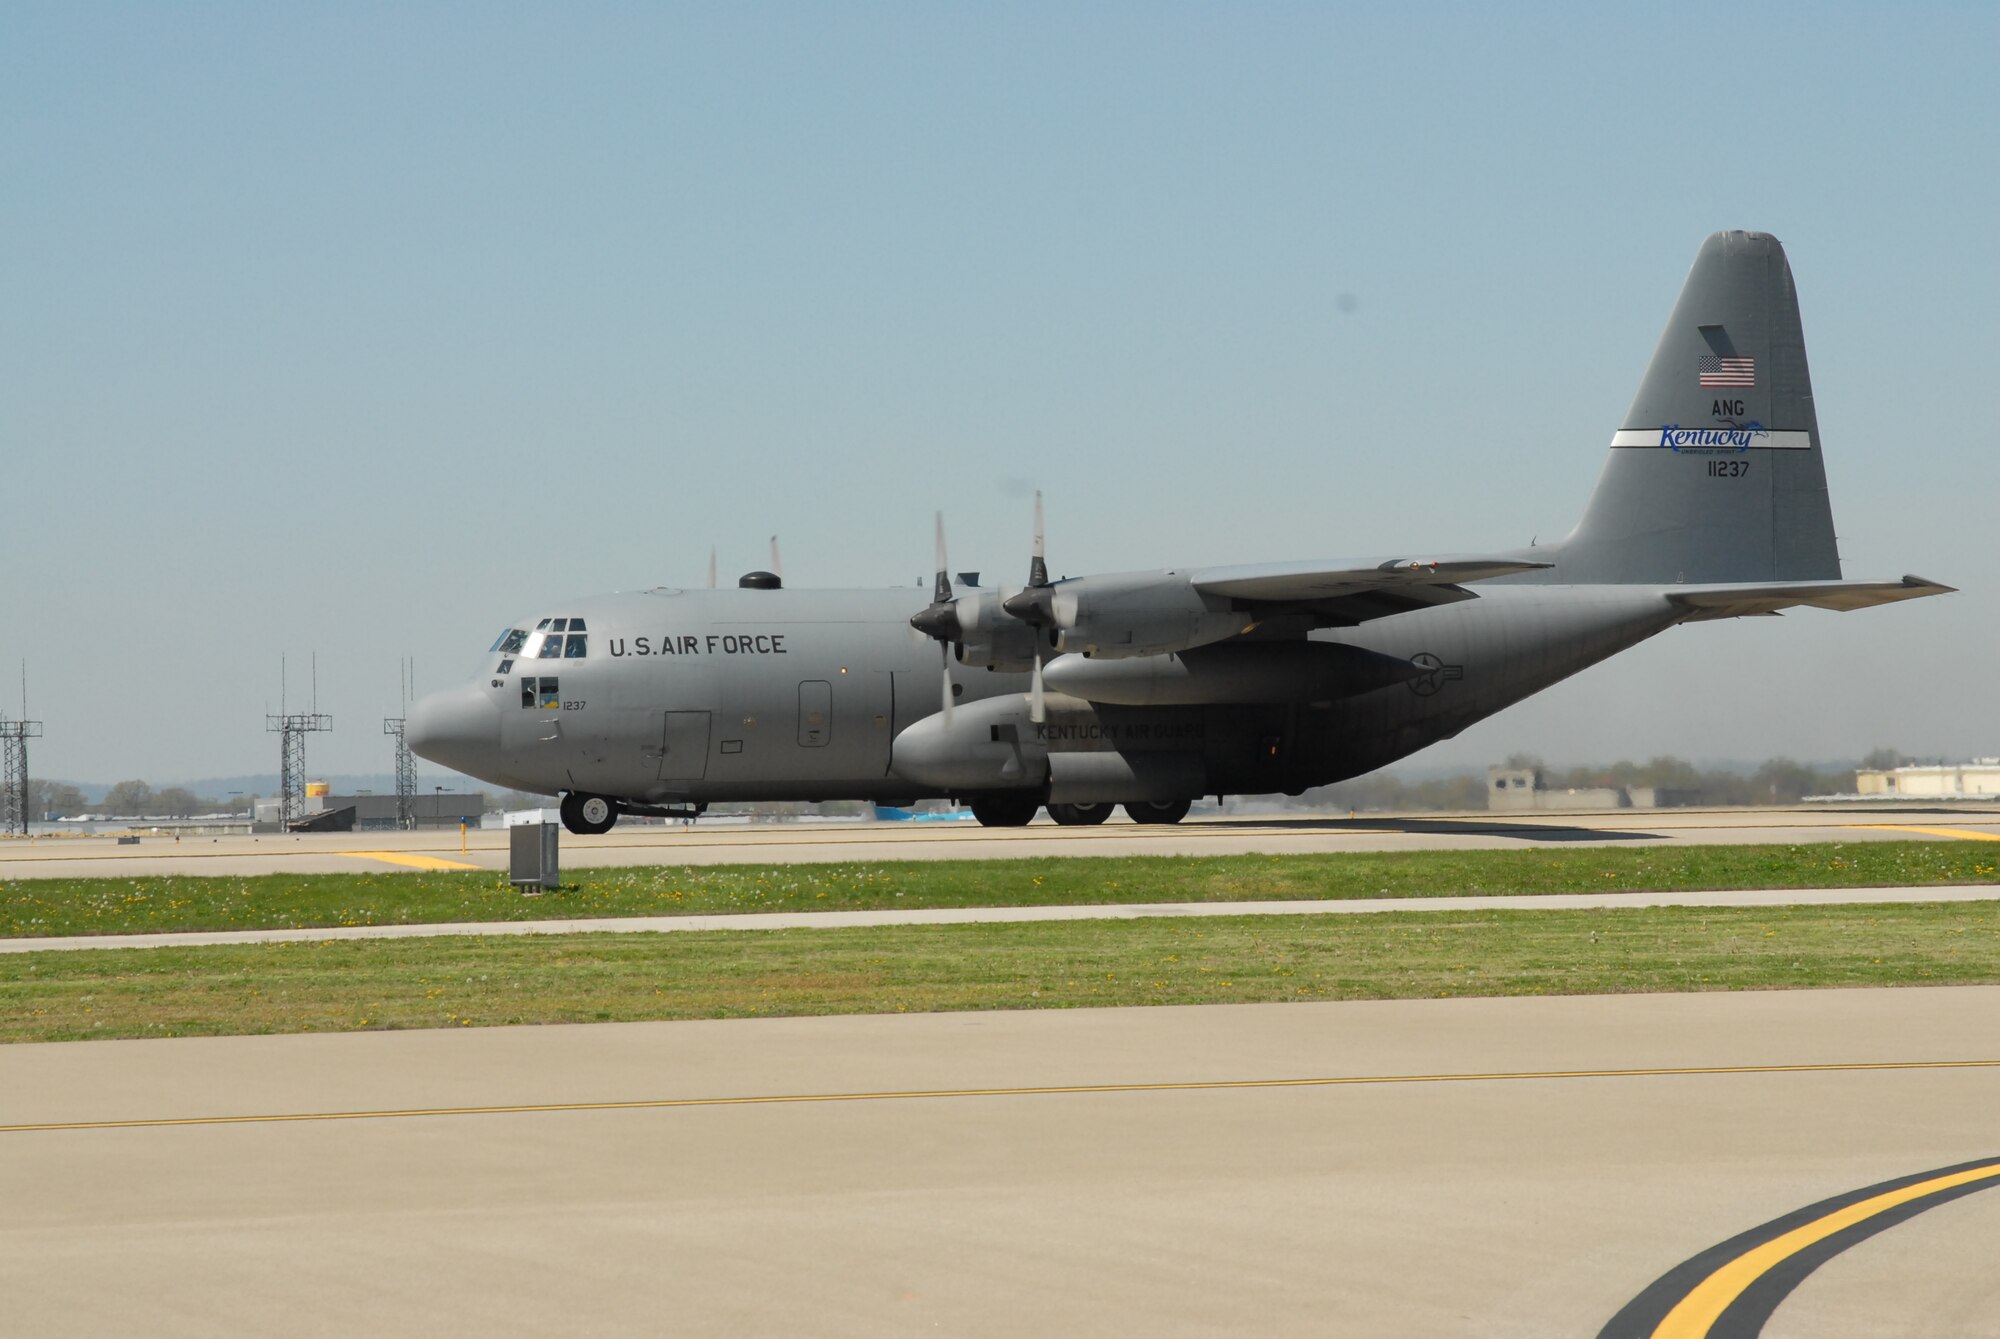 A Kentucky Air National Guard C-130 taxis on the tarmac at the Kentucky Air National Guard base as it prepares to do a practice run for the Thunder Over Louisville air show.  (USAF photo by Senior Airman Malcolm Byrd II)